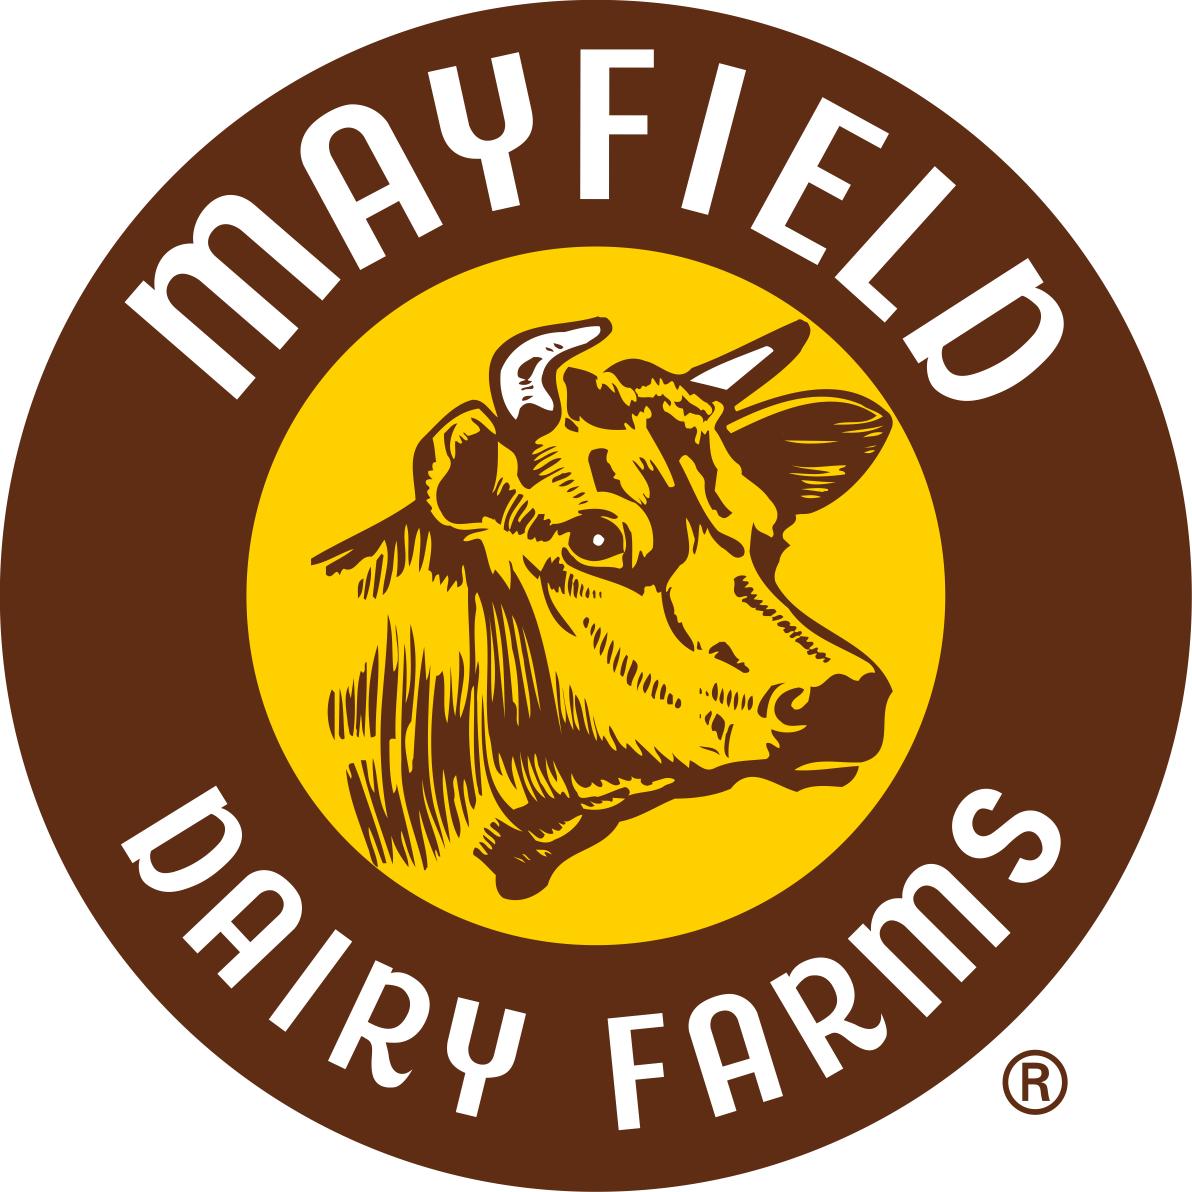 From 45 Jersey Cows To One Of The Southeast’s Favorite Dairy Brands ...